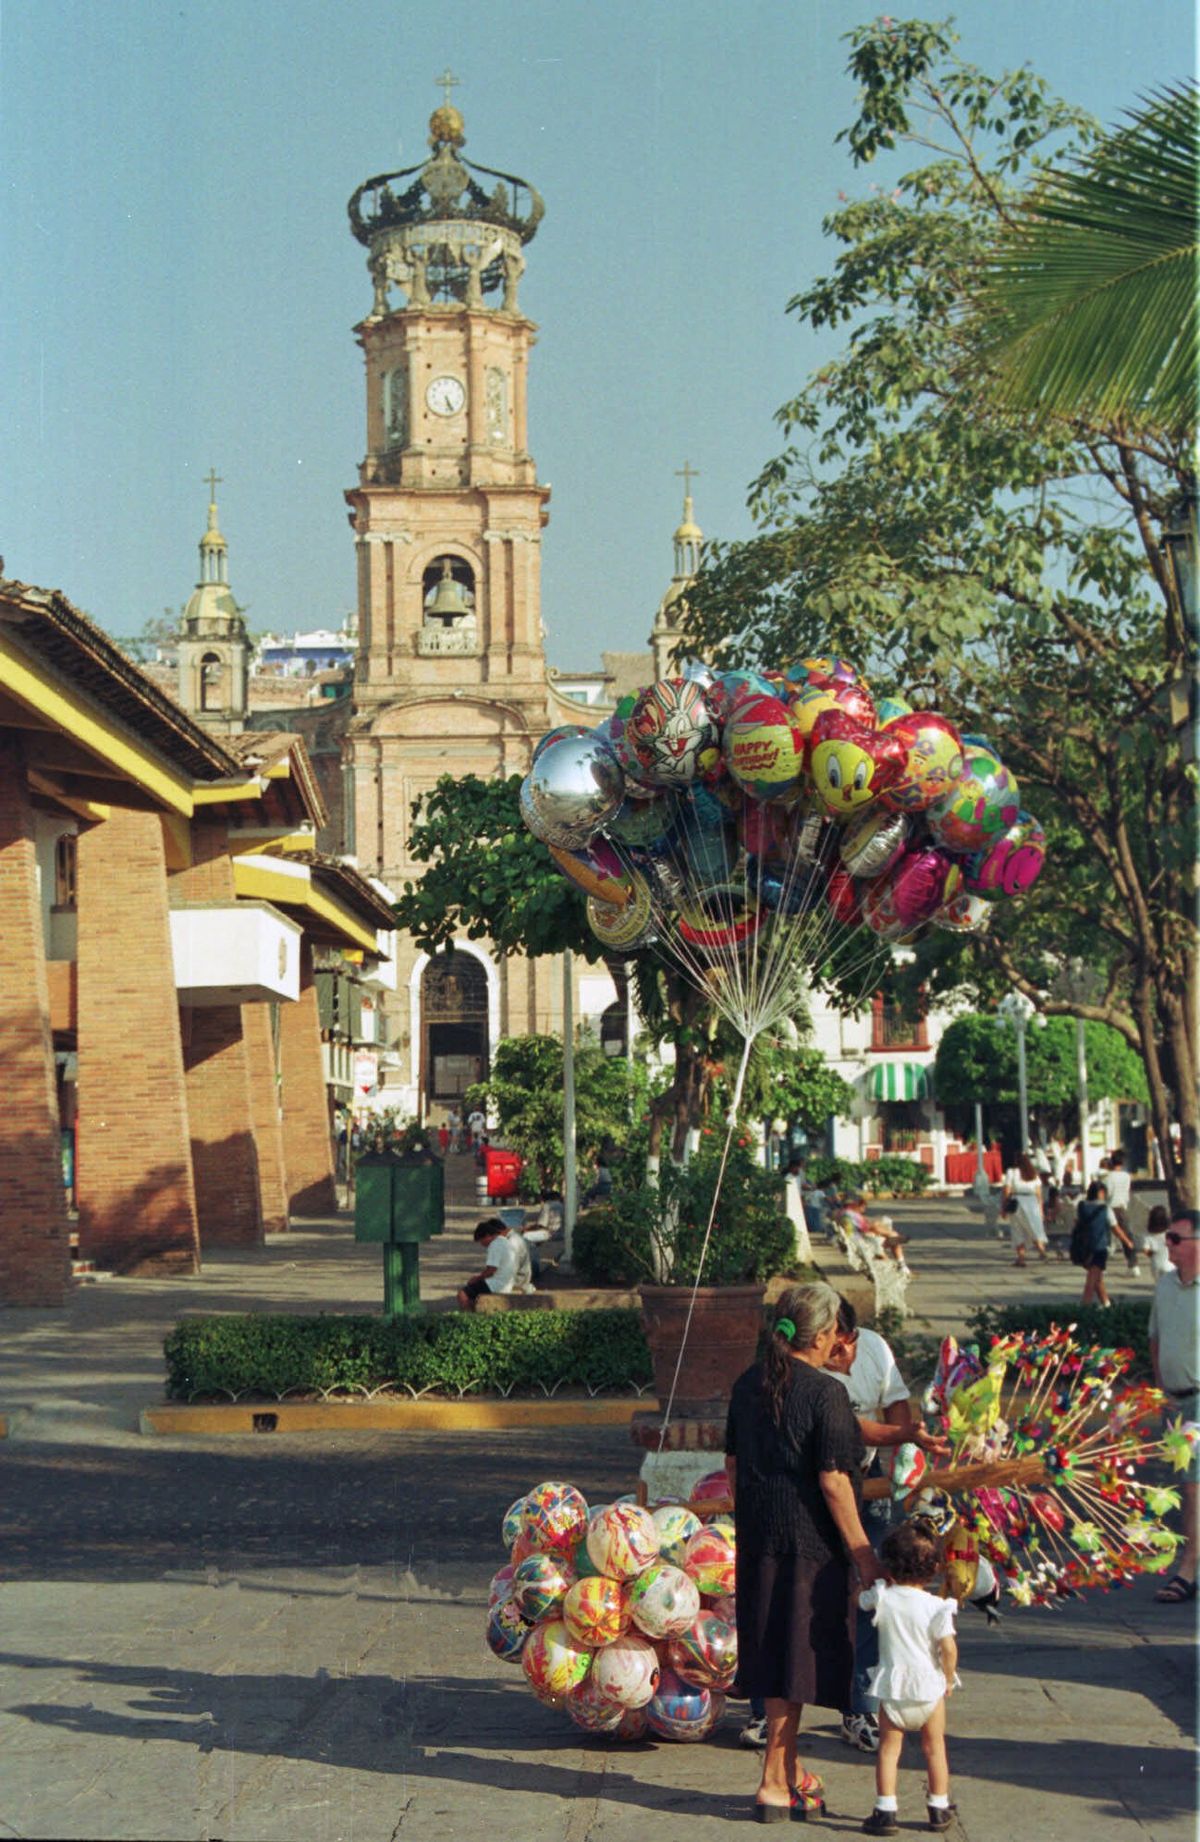 Customers make a purchase from a balloon vendor  in Puerto Vallarta, Mexico, in front of the city’s landmark Catholic church.  (Associated Press / The Spokesman-Review)